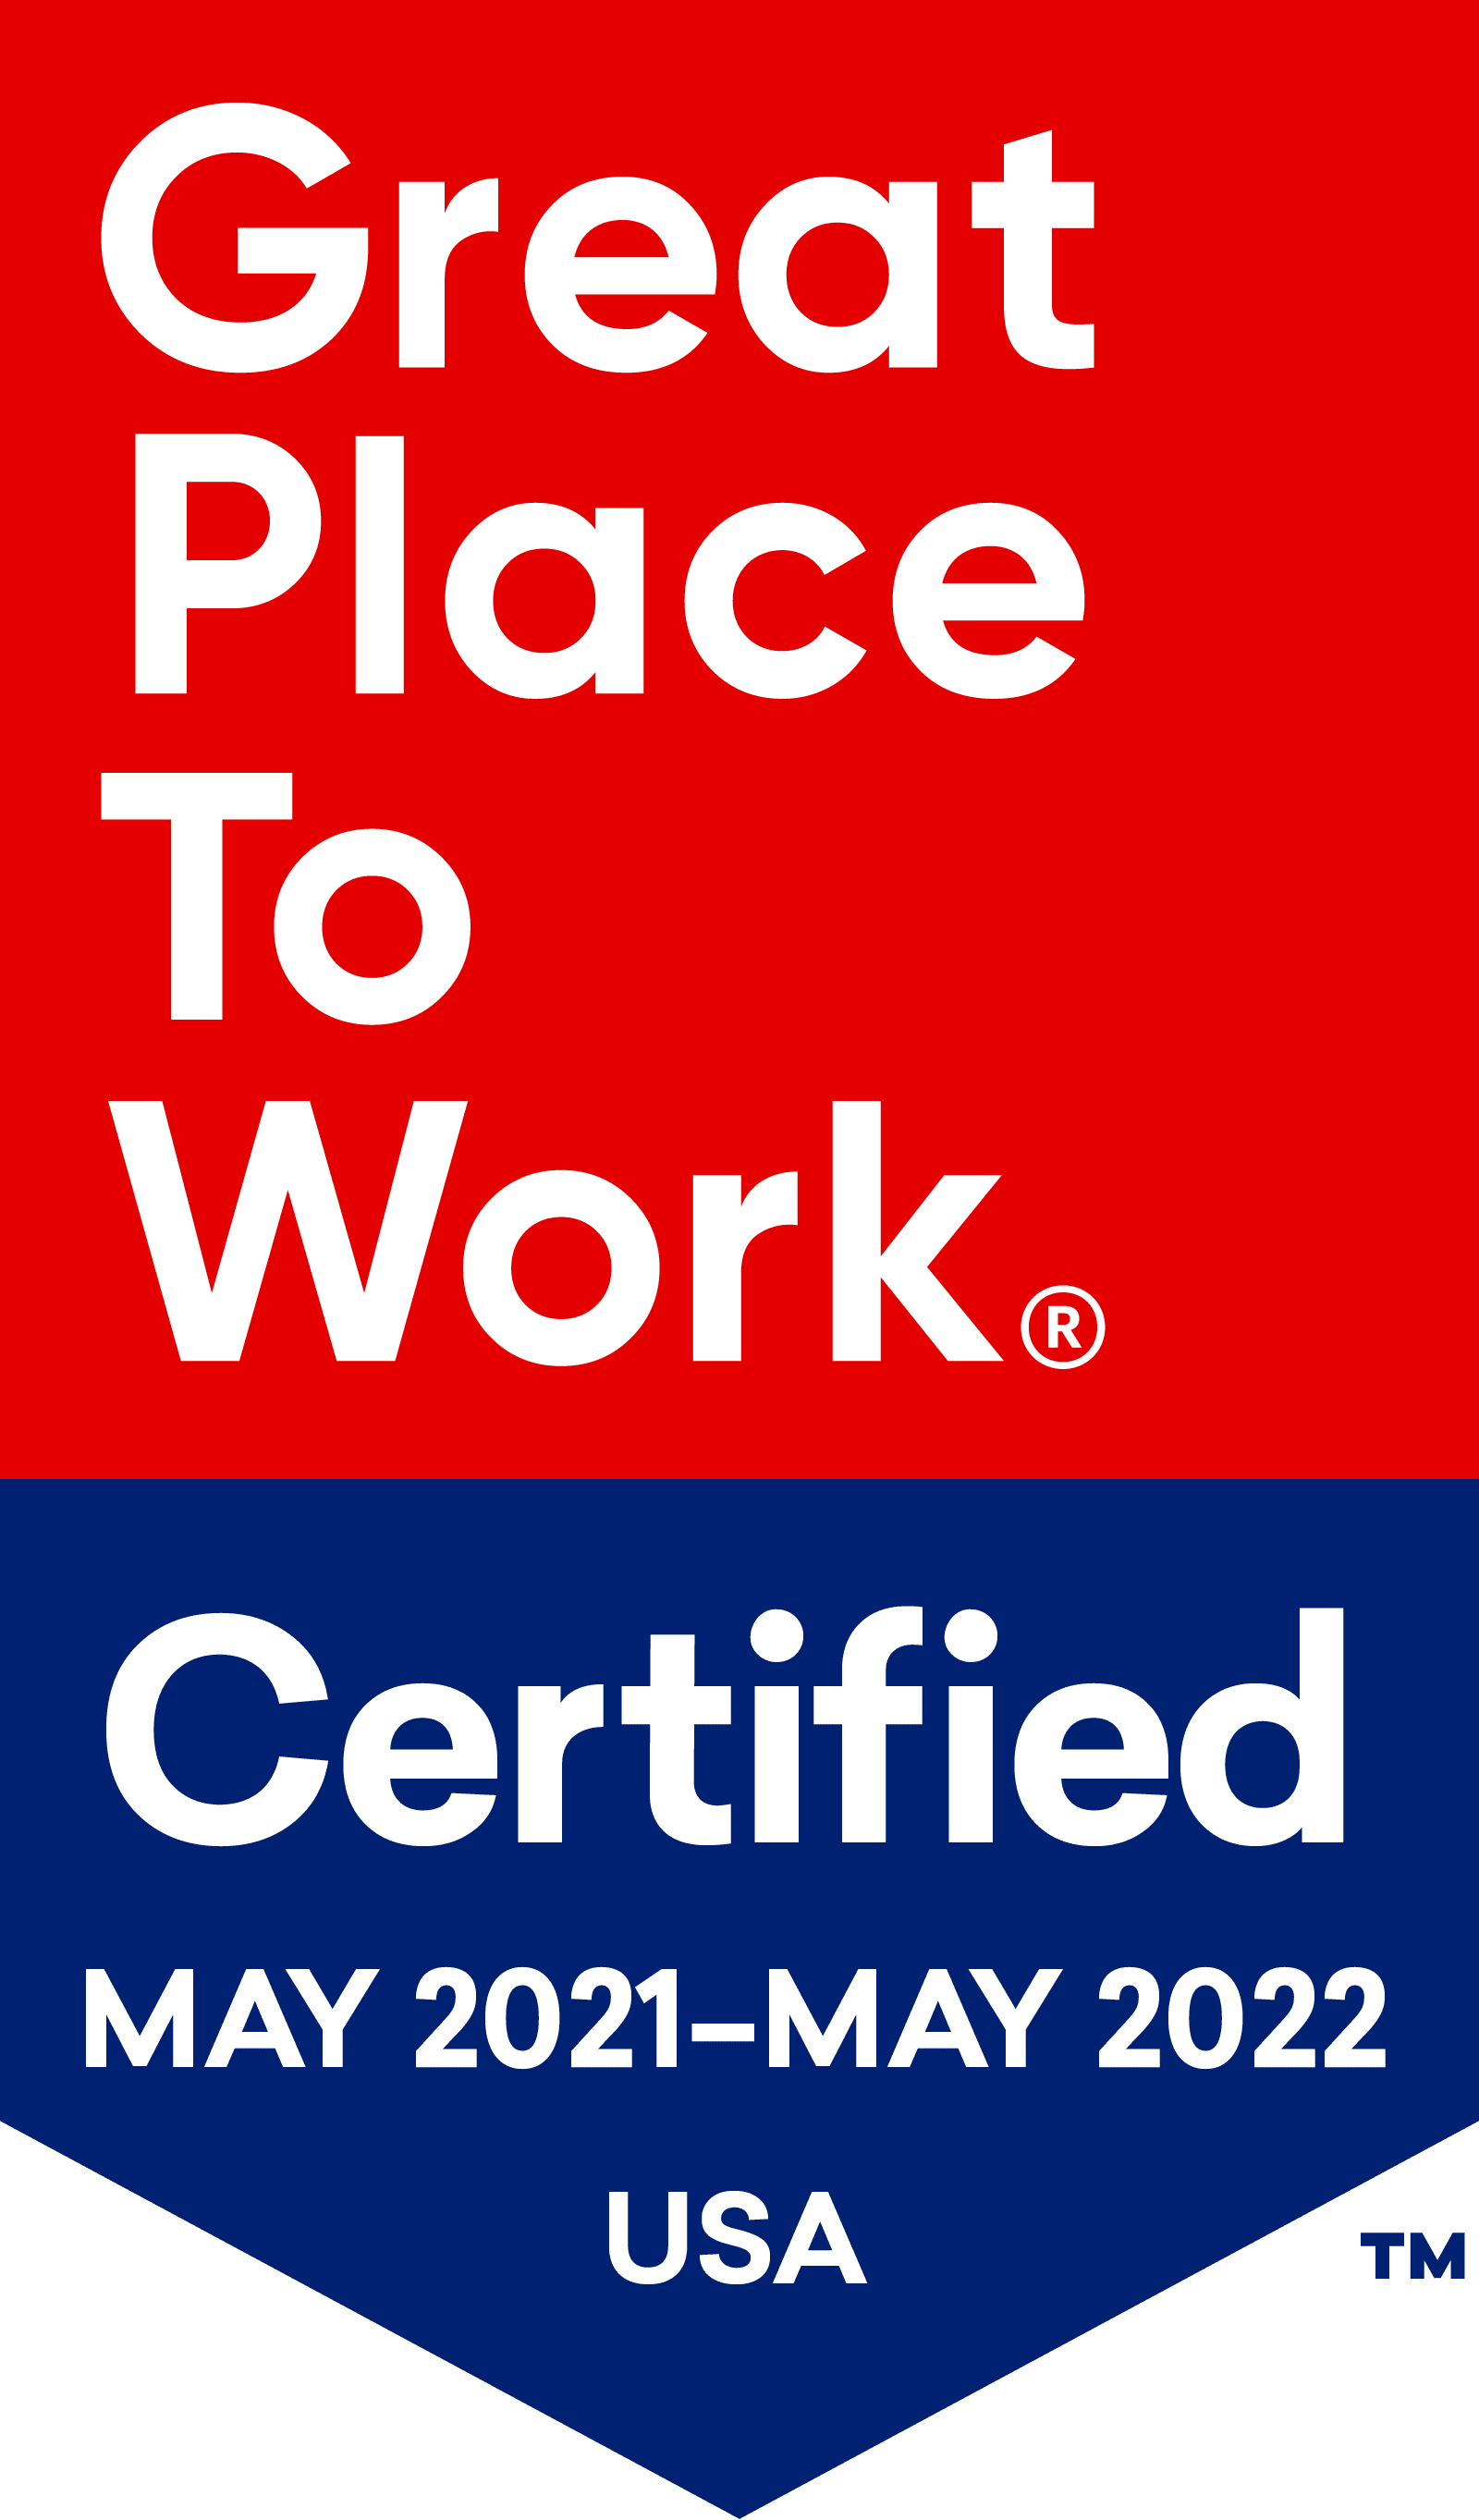 Highland Glen is Great Place To Work Certified